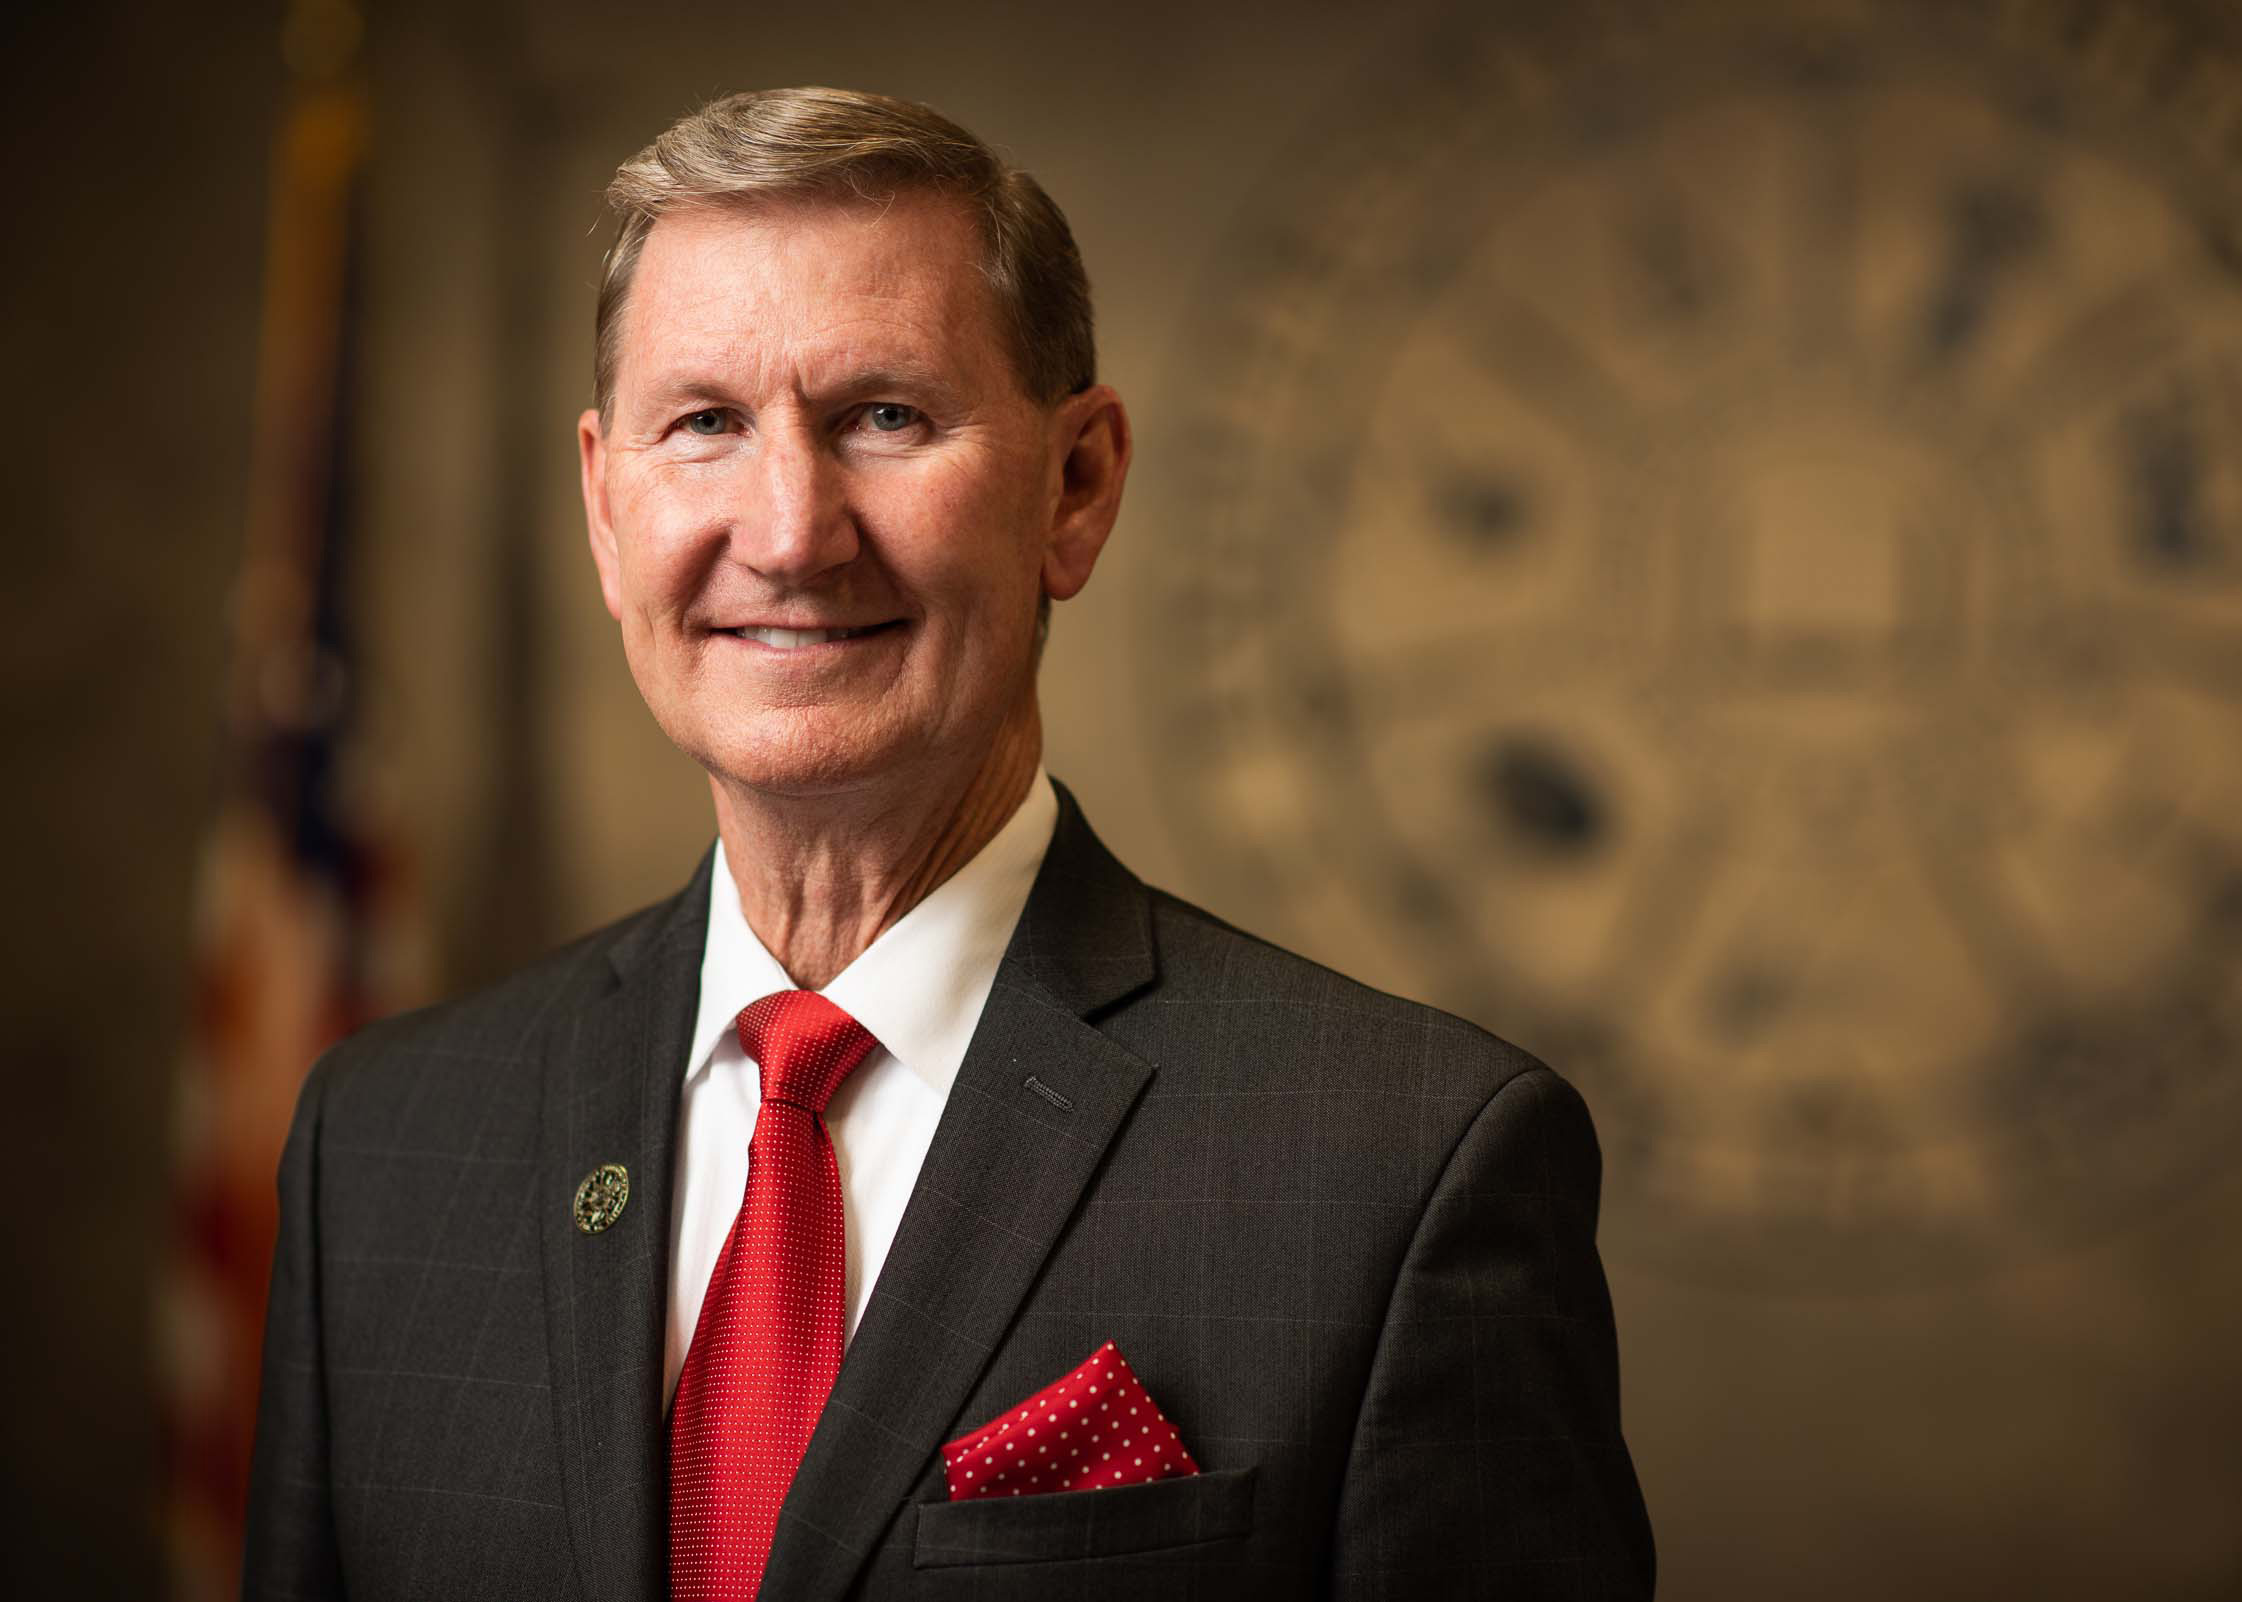 University of Nebraska President Ted Carter holds tuition at NCTA to $139 per credit hour for the next three years. (University of Nebraska photo)